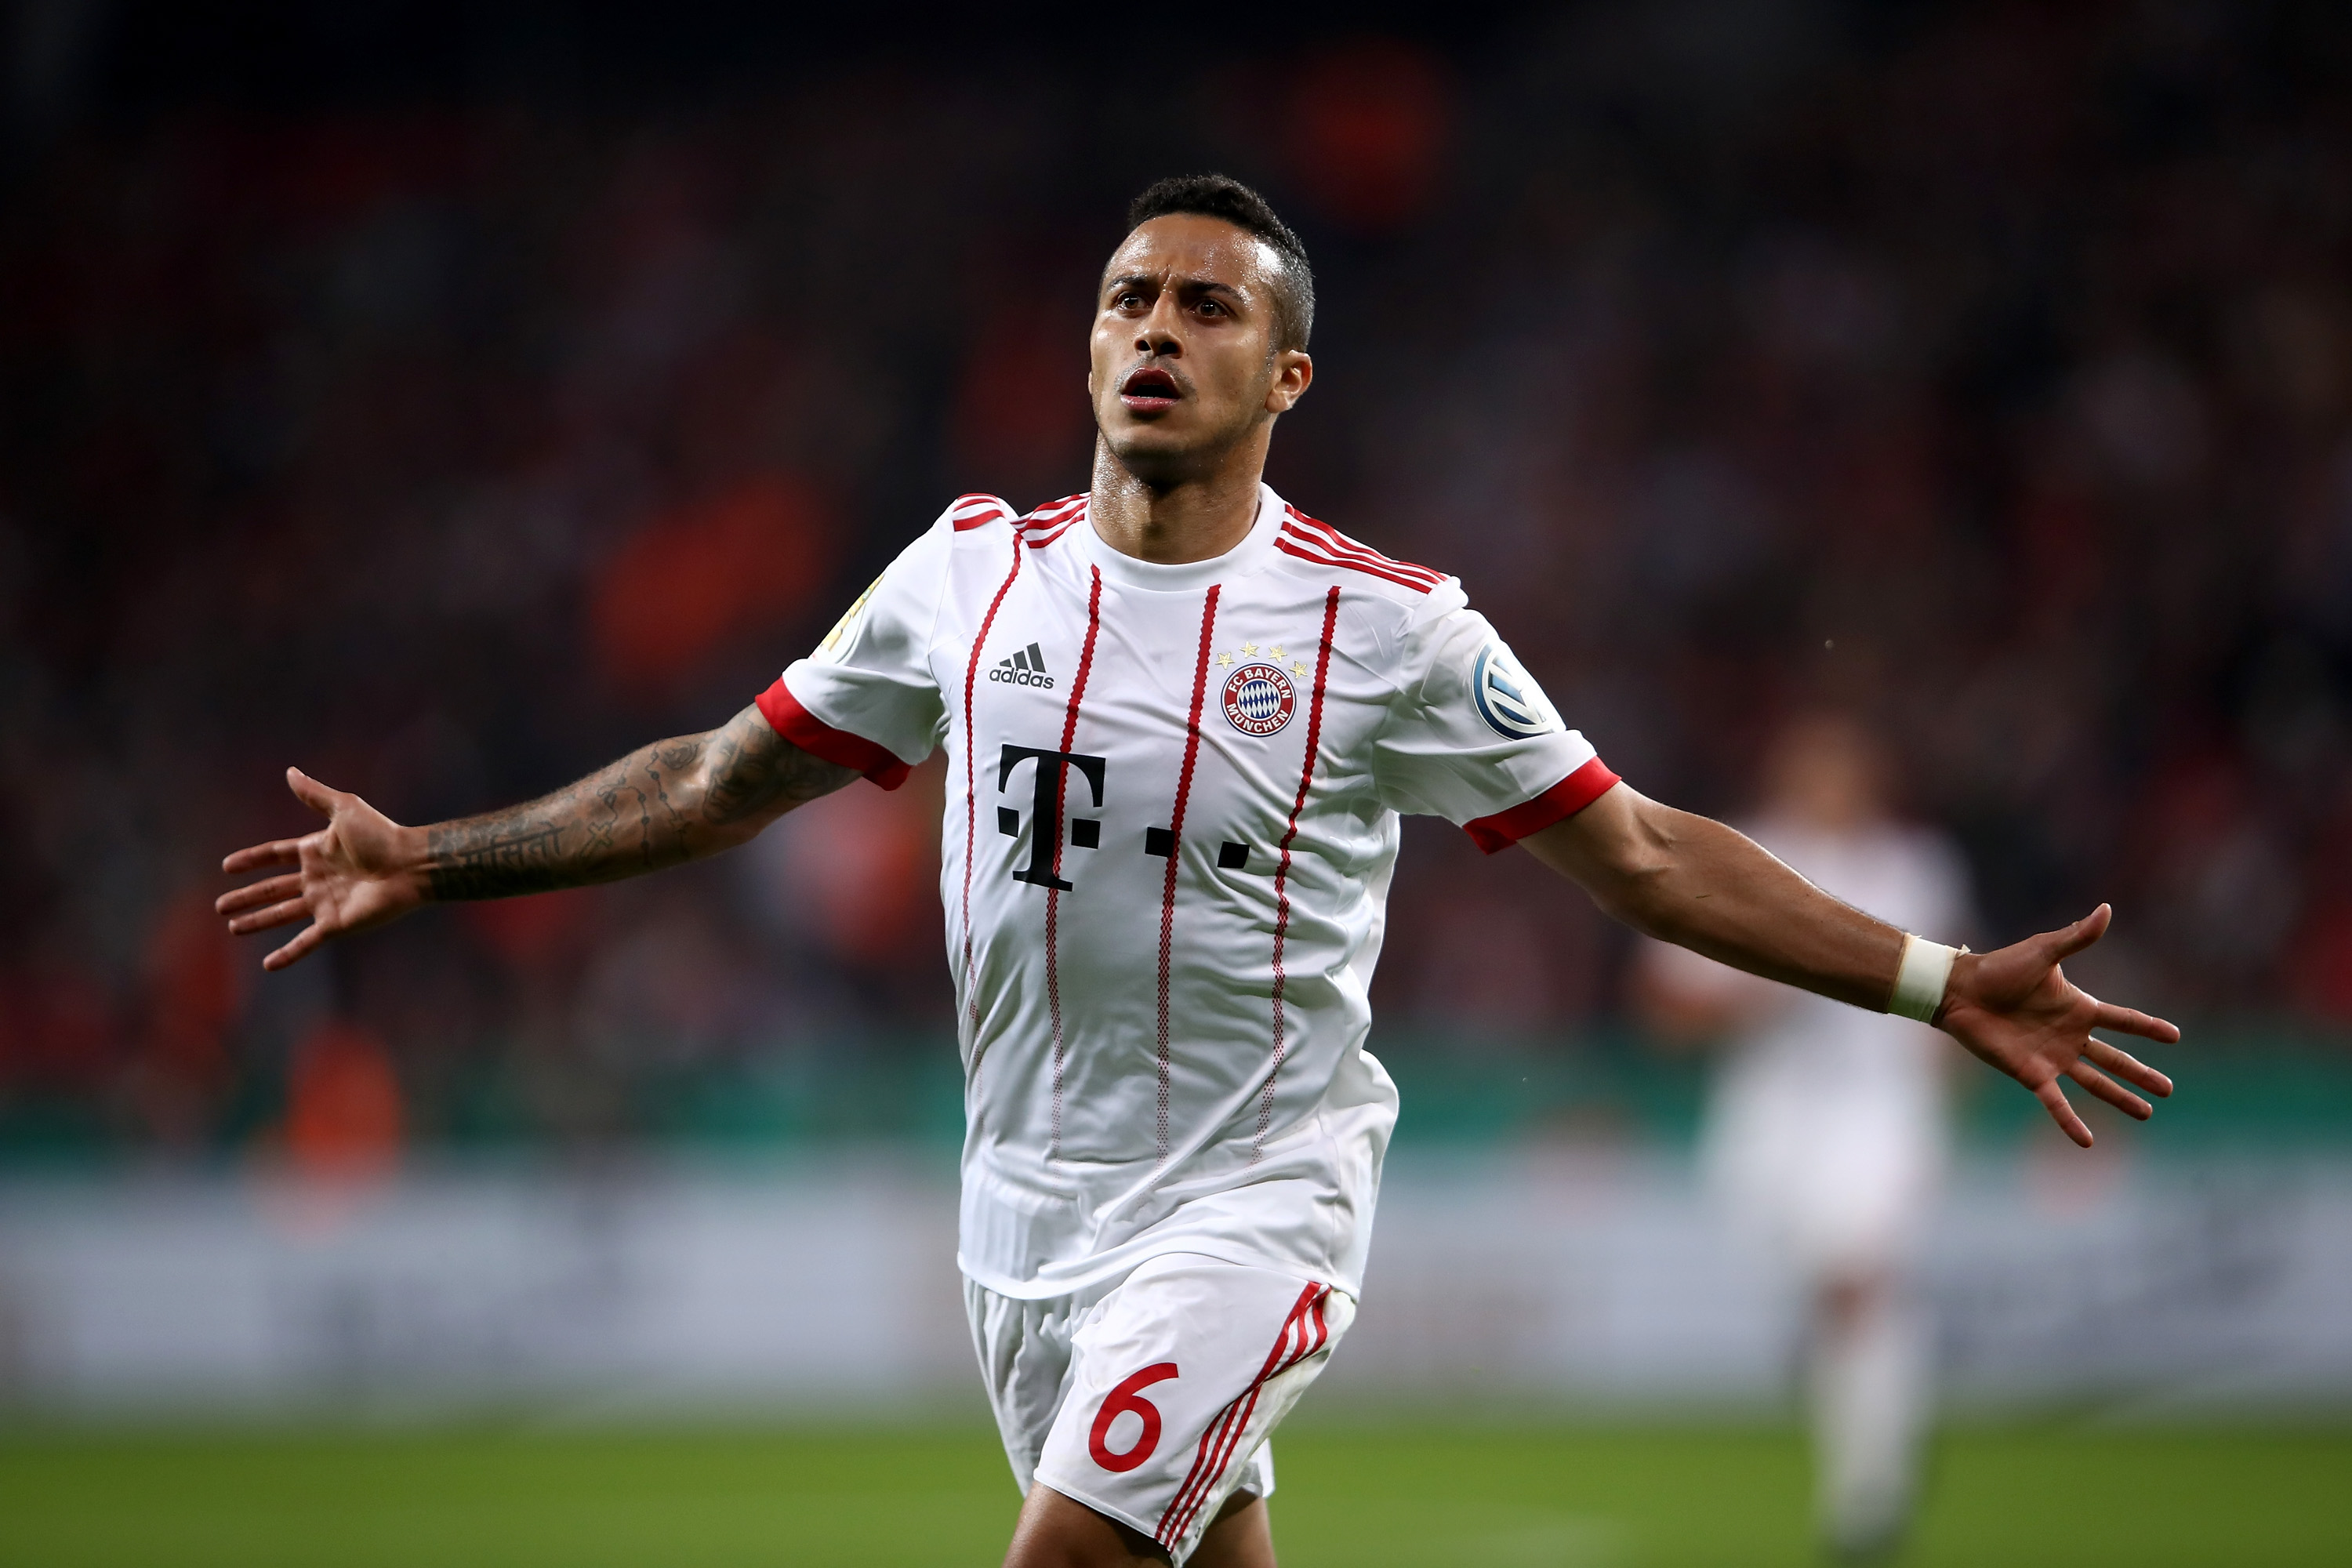 LEVERKUSEN, GERMANY - APRIL 17:  Thiago of Bayern celebrates after he scores the 4th goal during the DFB Cup semi final match between Bayer 04 Leverkusen and Bayern Munchen at BayArena on April 17, 2018 in Leverkusen, Germany.  (Photo by Alex Grimm/Bongarts/Getty Images)